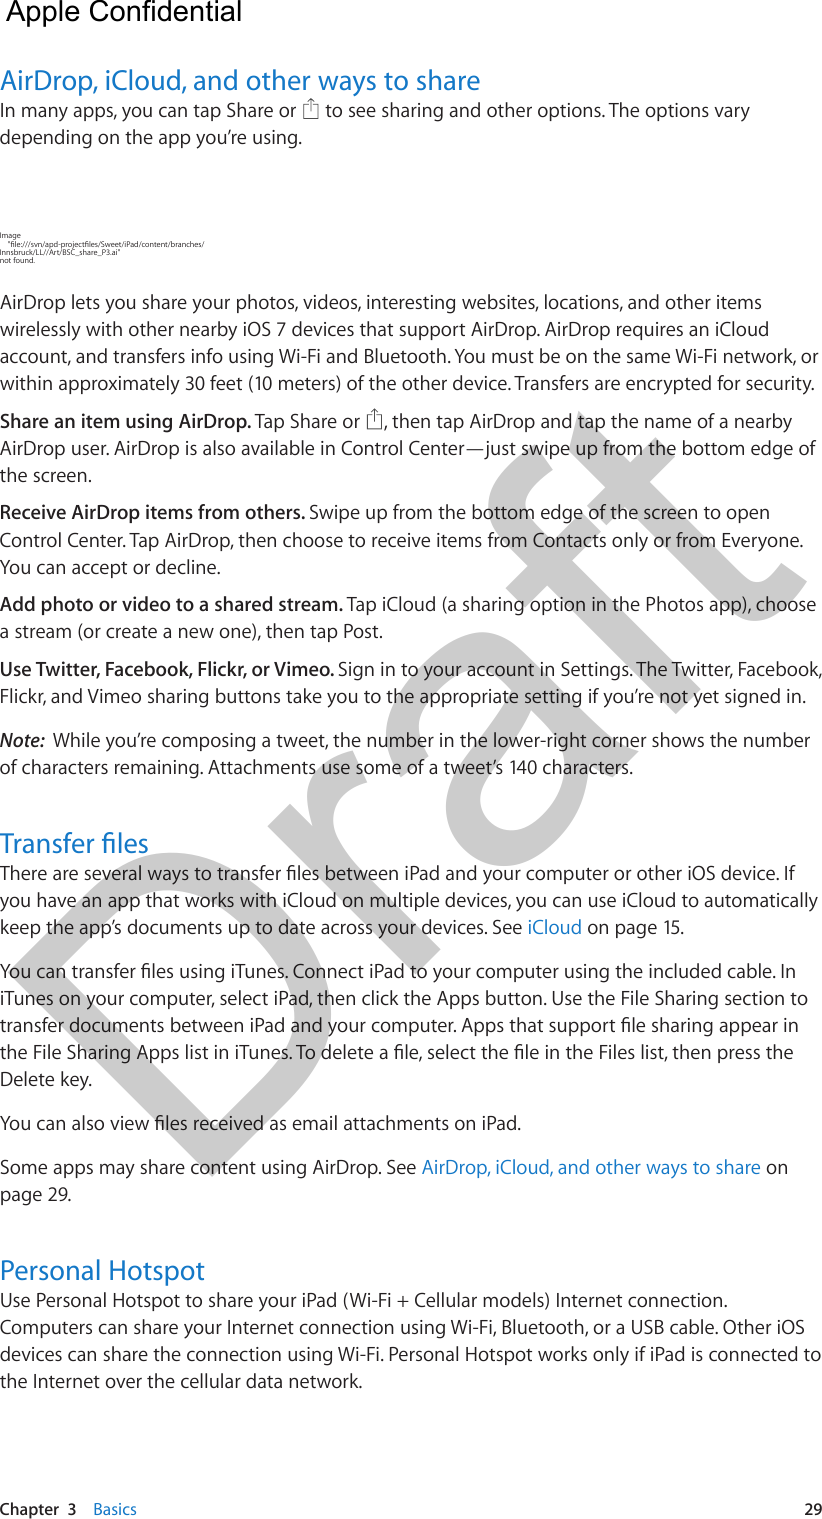 Chapter  3    Basics  29AirDrop, iCloud, and other ways to shareIn many apps, you can tap Share or   to see sharing and other options. The options vary depending on the app you’re using.Image Innsbruck/LL//Art/BSC_share_P3.ai&quot; not found.AirDrop lets you share your photos, videos, interesting websites, locations, and other items wirelessly with other nearby iOS 7 devices that support AirDrop. AirDrop requires an iCloud account, and transfers info using Wi-Fi and Bluetooth. You must be on the same Wi-Fi network, or within approximately 30 feet (10 meters) of the other device. Transfers are encrypted for security.Share an item using AirDrop. Tap Share or  , then tap AirDrop and tap the name of a nearby AirDrop user. AirDrop is also available in Control Center—just swipe up from the bottom edge of the screen.Receive AirDrop items from others. Swipe up from the bottom edge of the screen to open Control Center. Tap AirDrop, then choose to receive items from Contacts only or from Everyone. You can accept or decline.Add photo or video to a shared stream. Tap iCloud (a sharing option in the Photos app), choose a stream (or create a new one), then tap Post.Use Twitter, Facebook, Flickr, or Vimeo. Sign in to your account in Settings. The Twitter, Facebook, Flickr, and Vimeo sharing buttons take you to the appropriate setting if you’re not yet signed in.Note:  While you’re composing a tweet, the number in the lower-right corner shows the number of characters remaining. Attachments use some of a tweet’s 140 characters.you have an app that works with iCloud on multiple devices, you can use iCloud to automatically keep the app’s documents up to date across your devices. See iCloud on page 15.iTunes on your computer, select iPad, then click the Apps button. Use the File Sharing section to Delete key.Some apps may share content using AirDrop. See AirDrop, iCloud, and other ways to share on page 29.Personal HotspotUse Personal Hotspot to share your iPad (Wi-Fi + Cellular models) Internet connection. Computers can share your Internet connection using Wi-Fi, Bluetooth, or a USB cable. Other iOS devices can share the connection using Wi-Fi. Personal Hotspot works only if iPad is connected to the Internet over the cellular data network.  Apple Confidential Draft